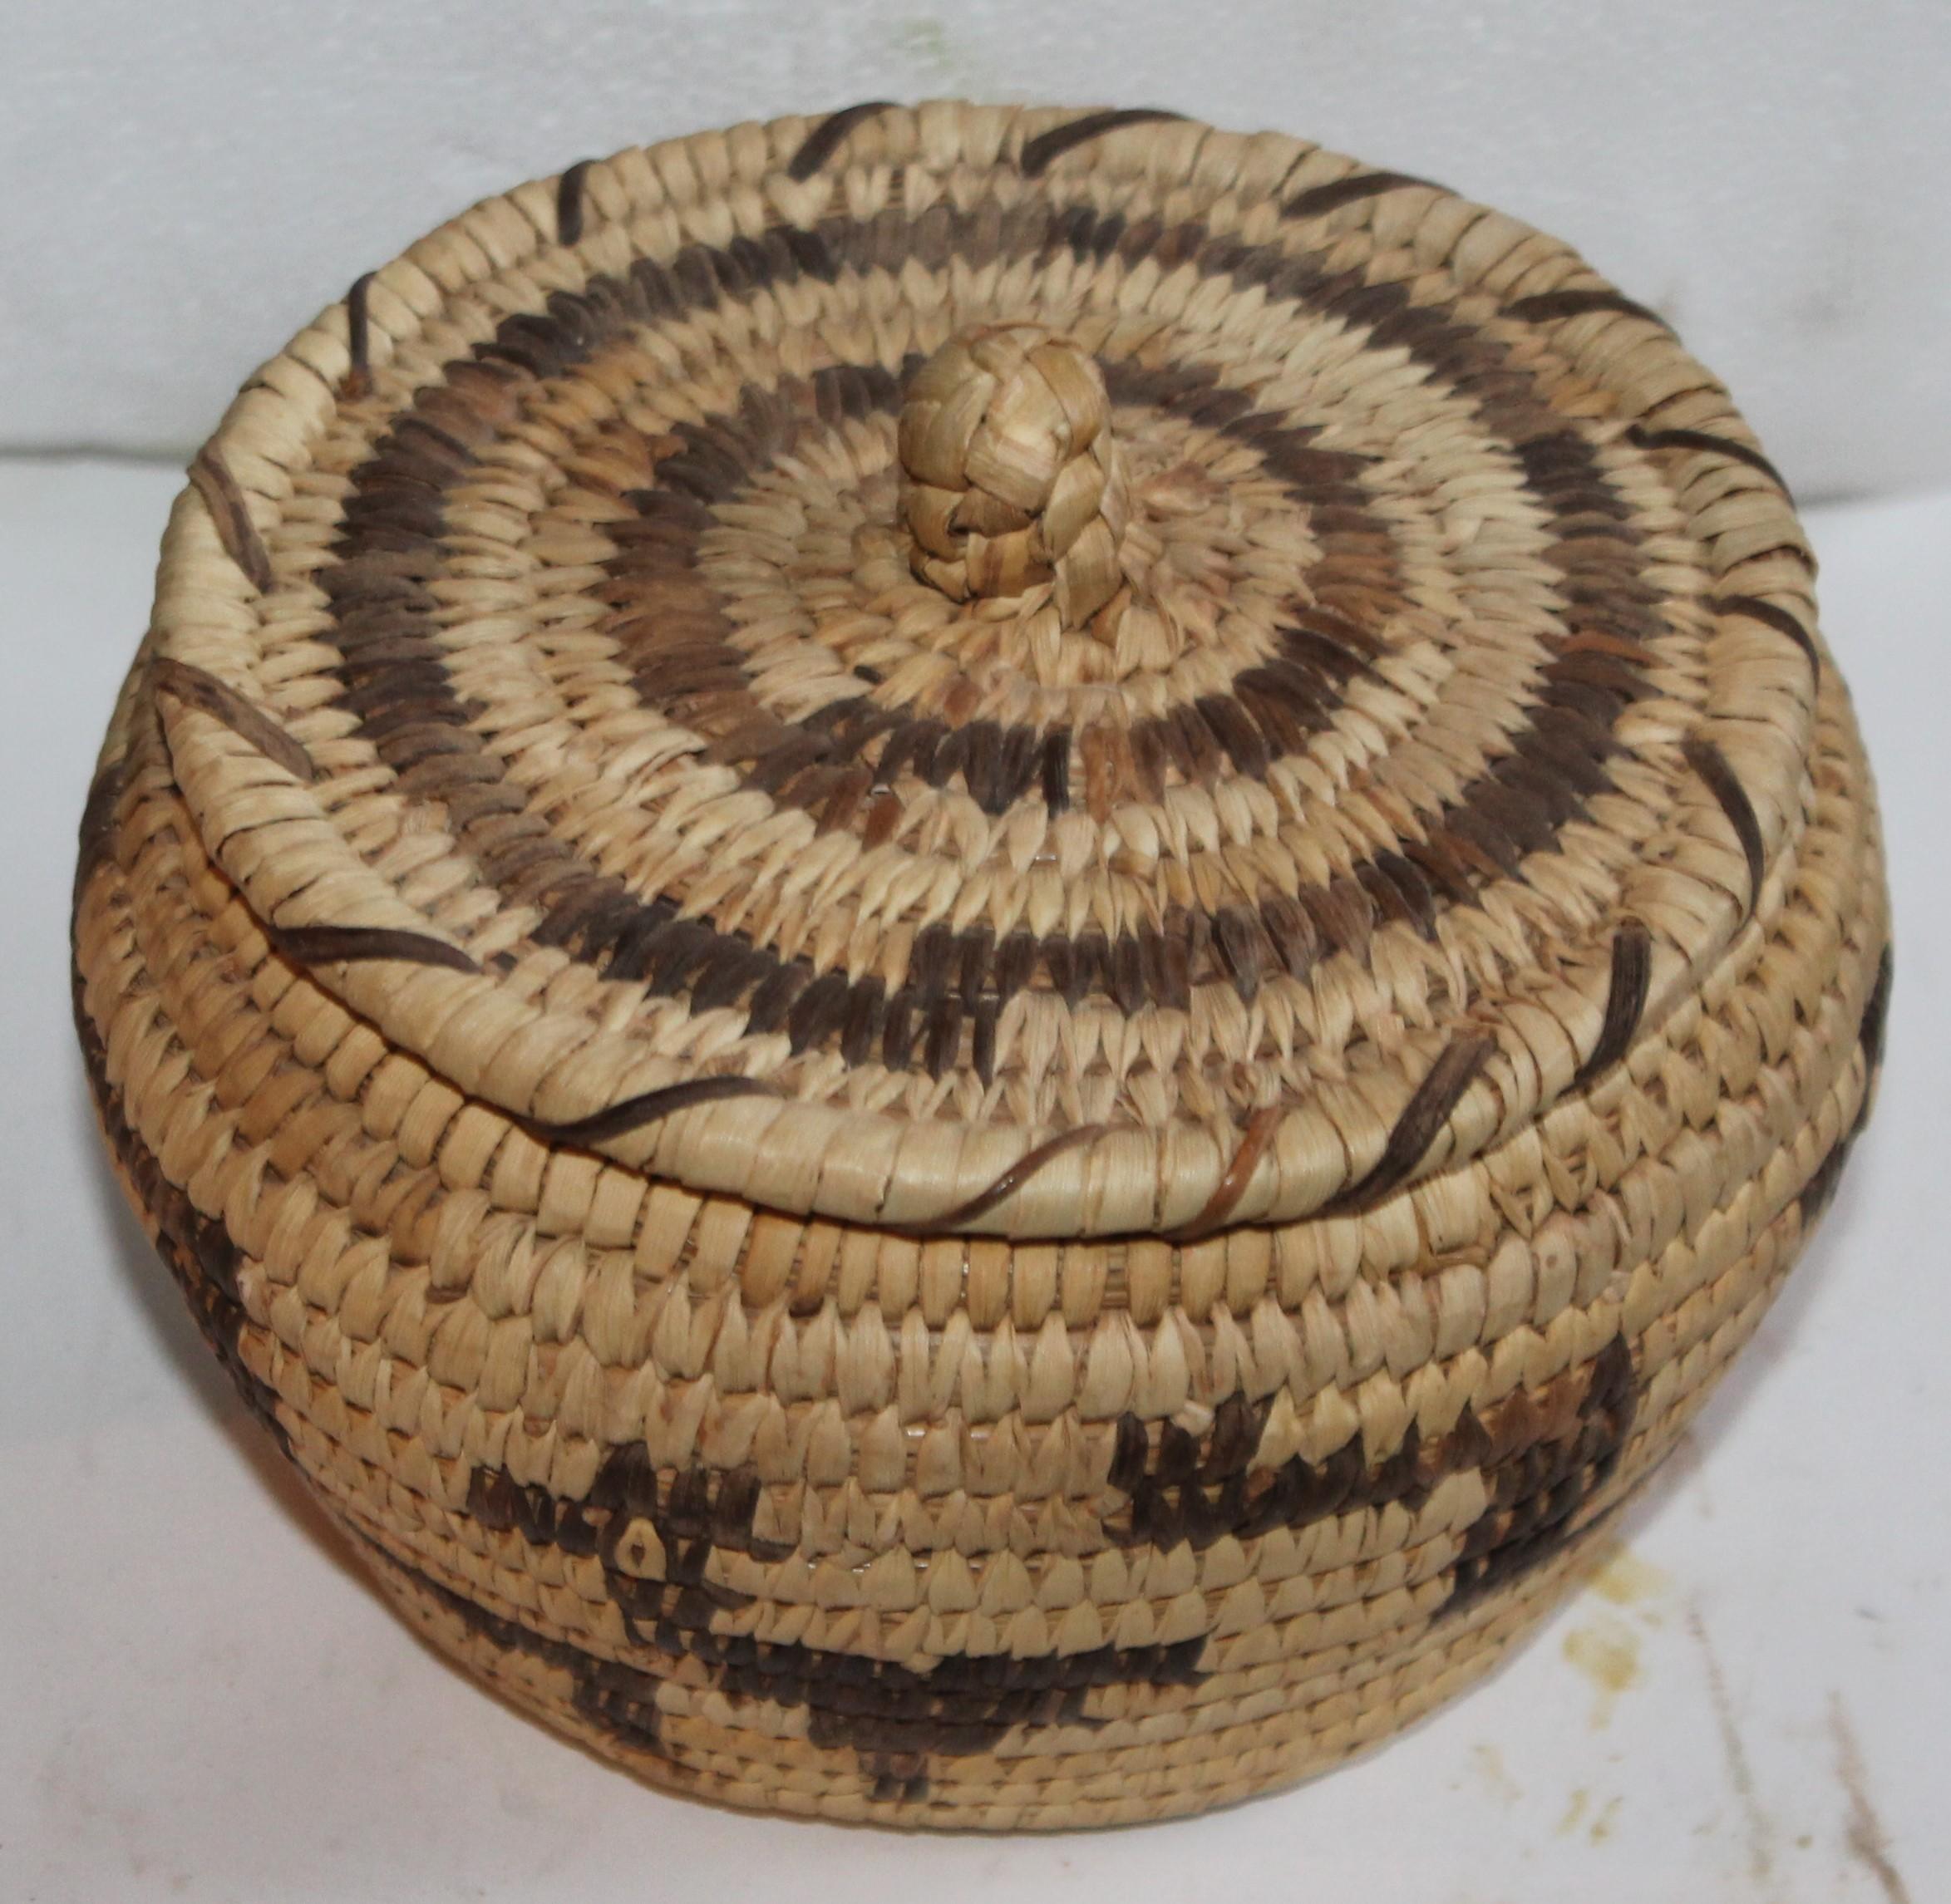 This Papago pictorial lidded basket in great condition.